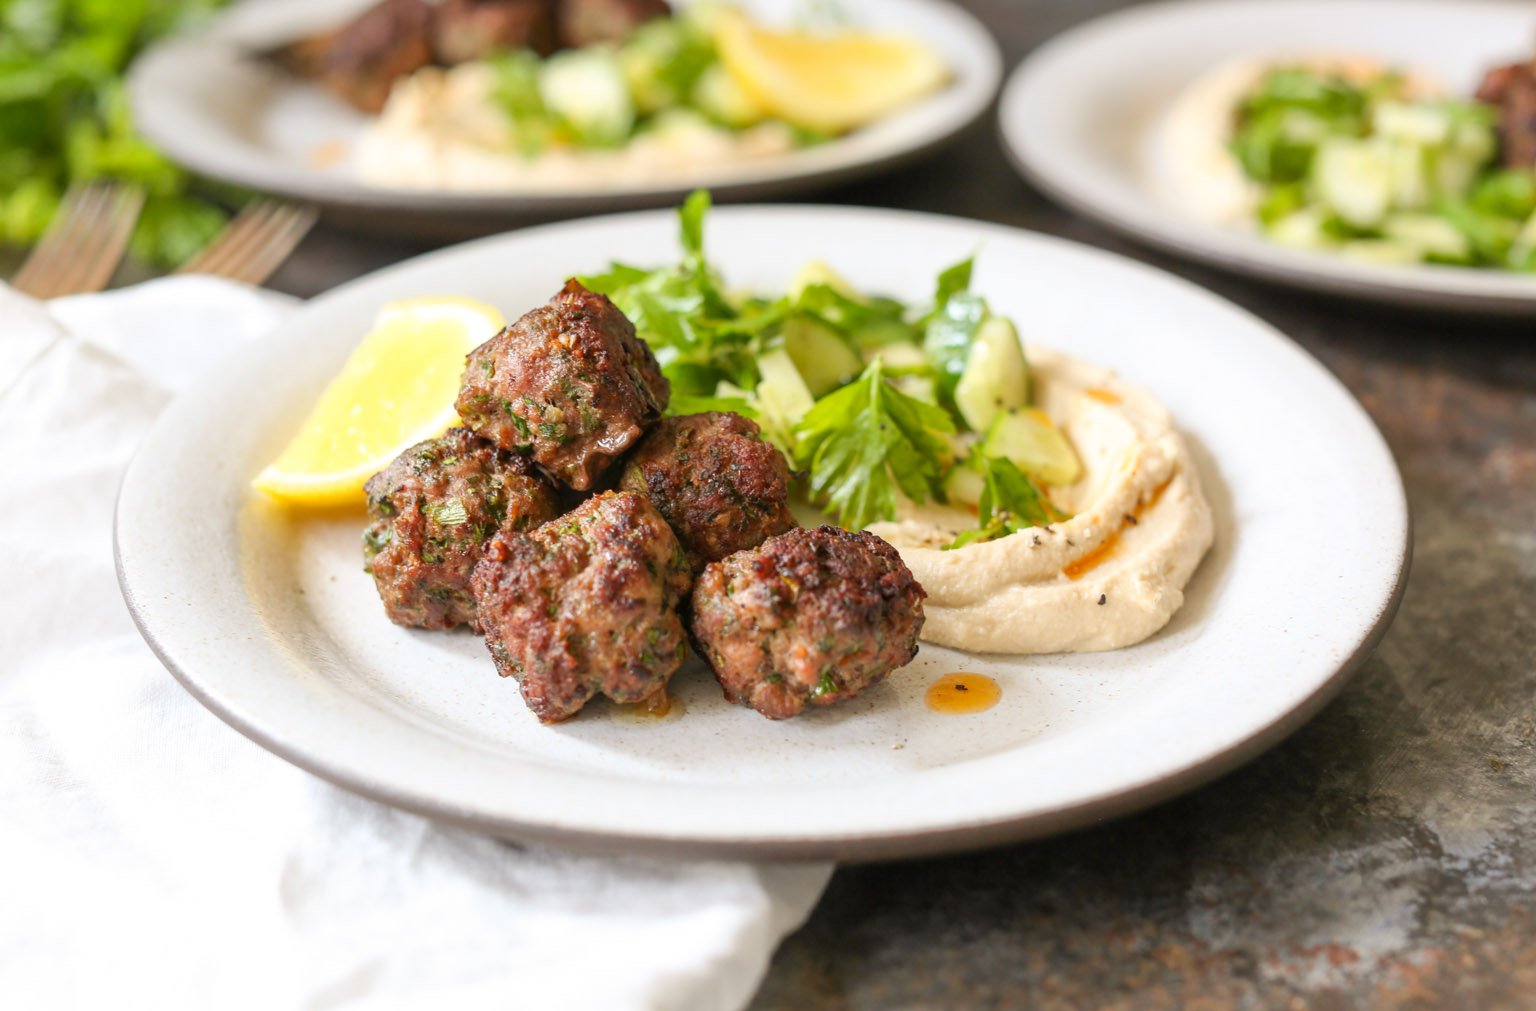 Side view of a plate of spiced lamb meatballs with hummus and a lemon wedge.